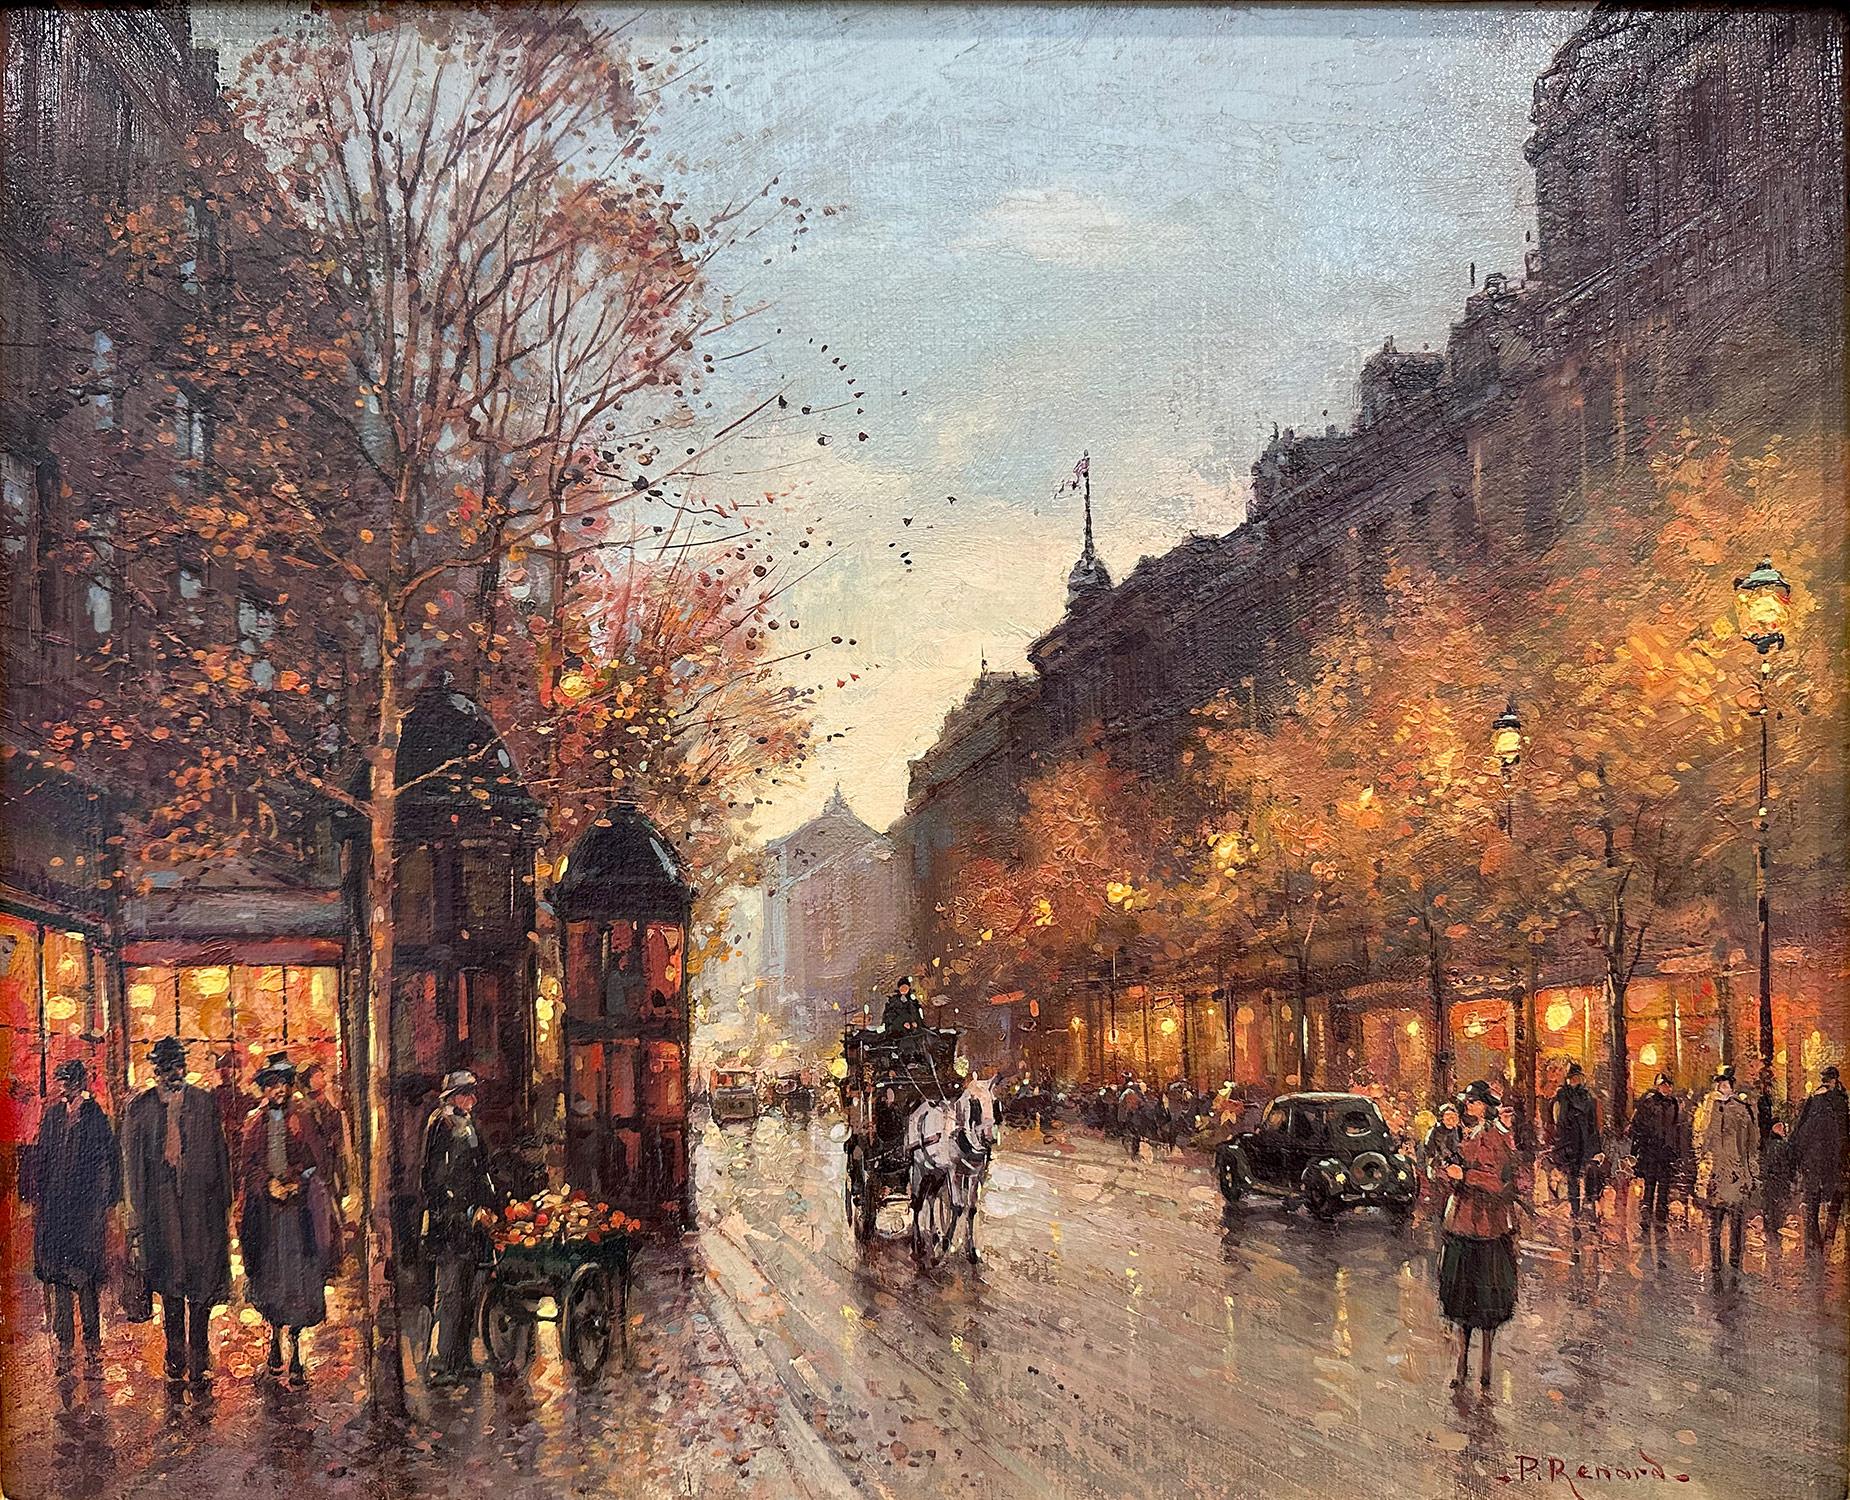 In this piece, artist Paul Renard depicts his subject in a most romantic yet academic way.  The artist was truly a master of capturing the magic and romance of the busy streets of Paris portraying the way of the times effortlessly. With much